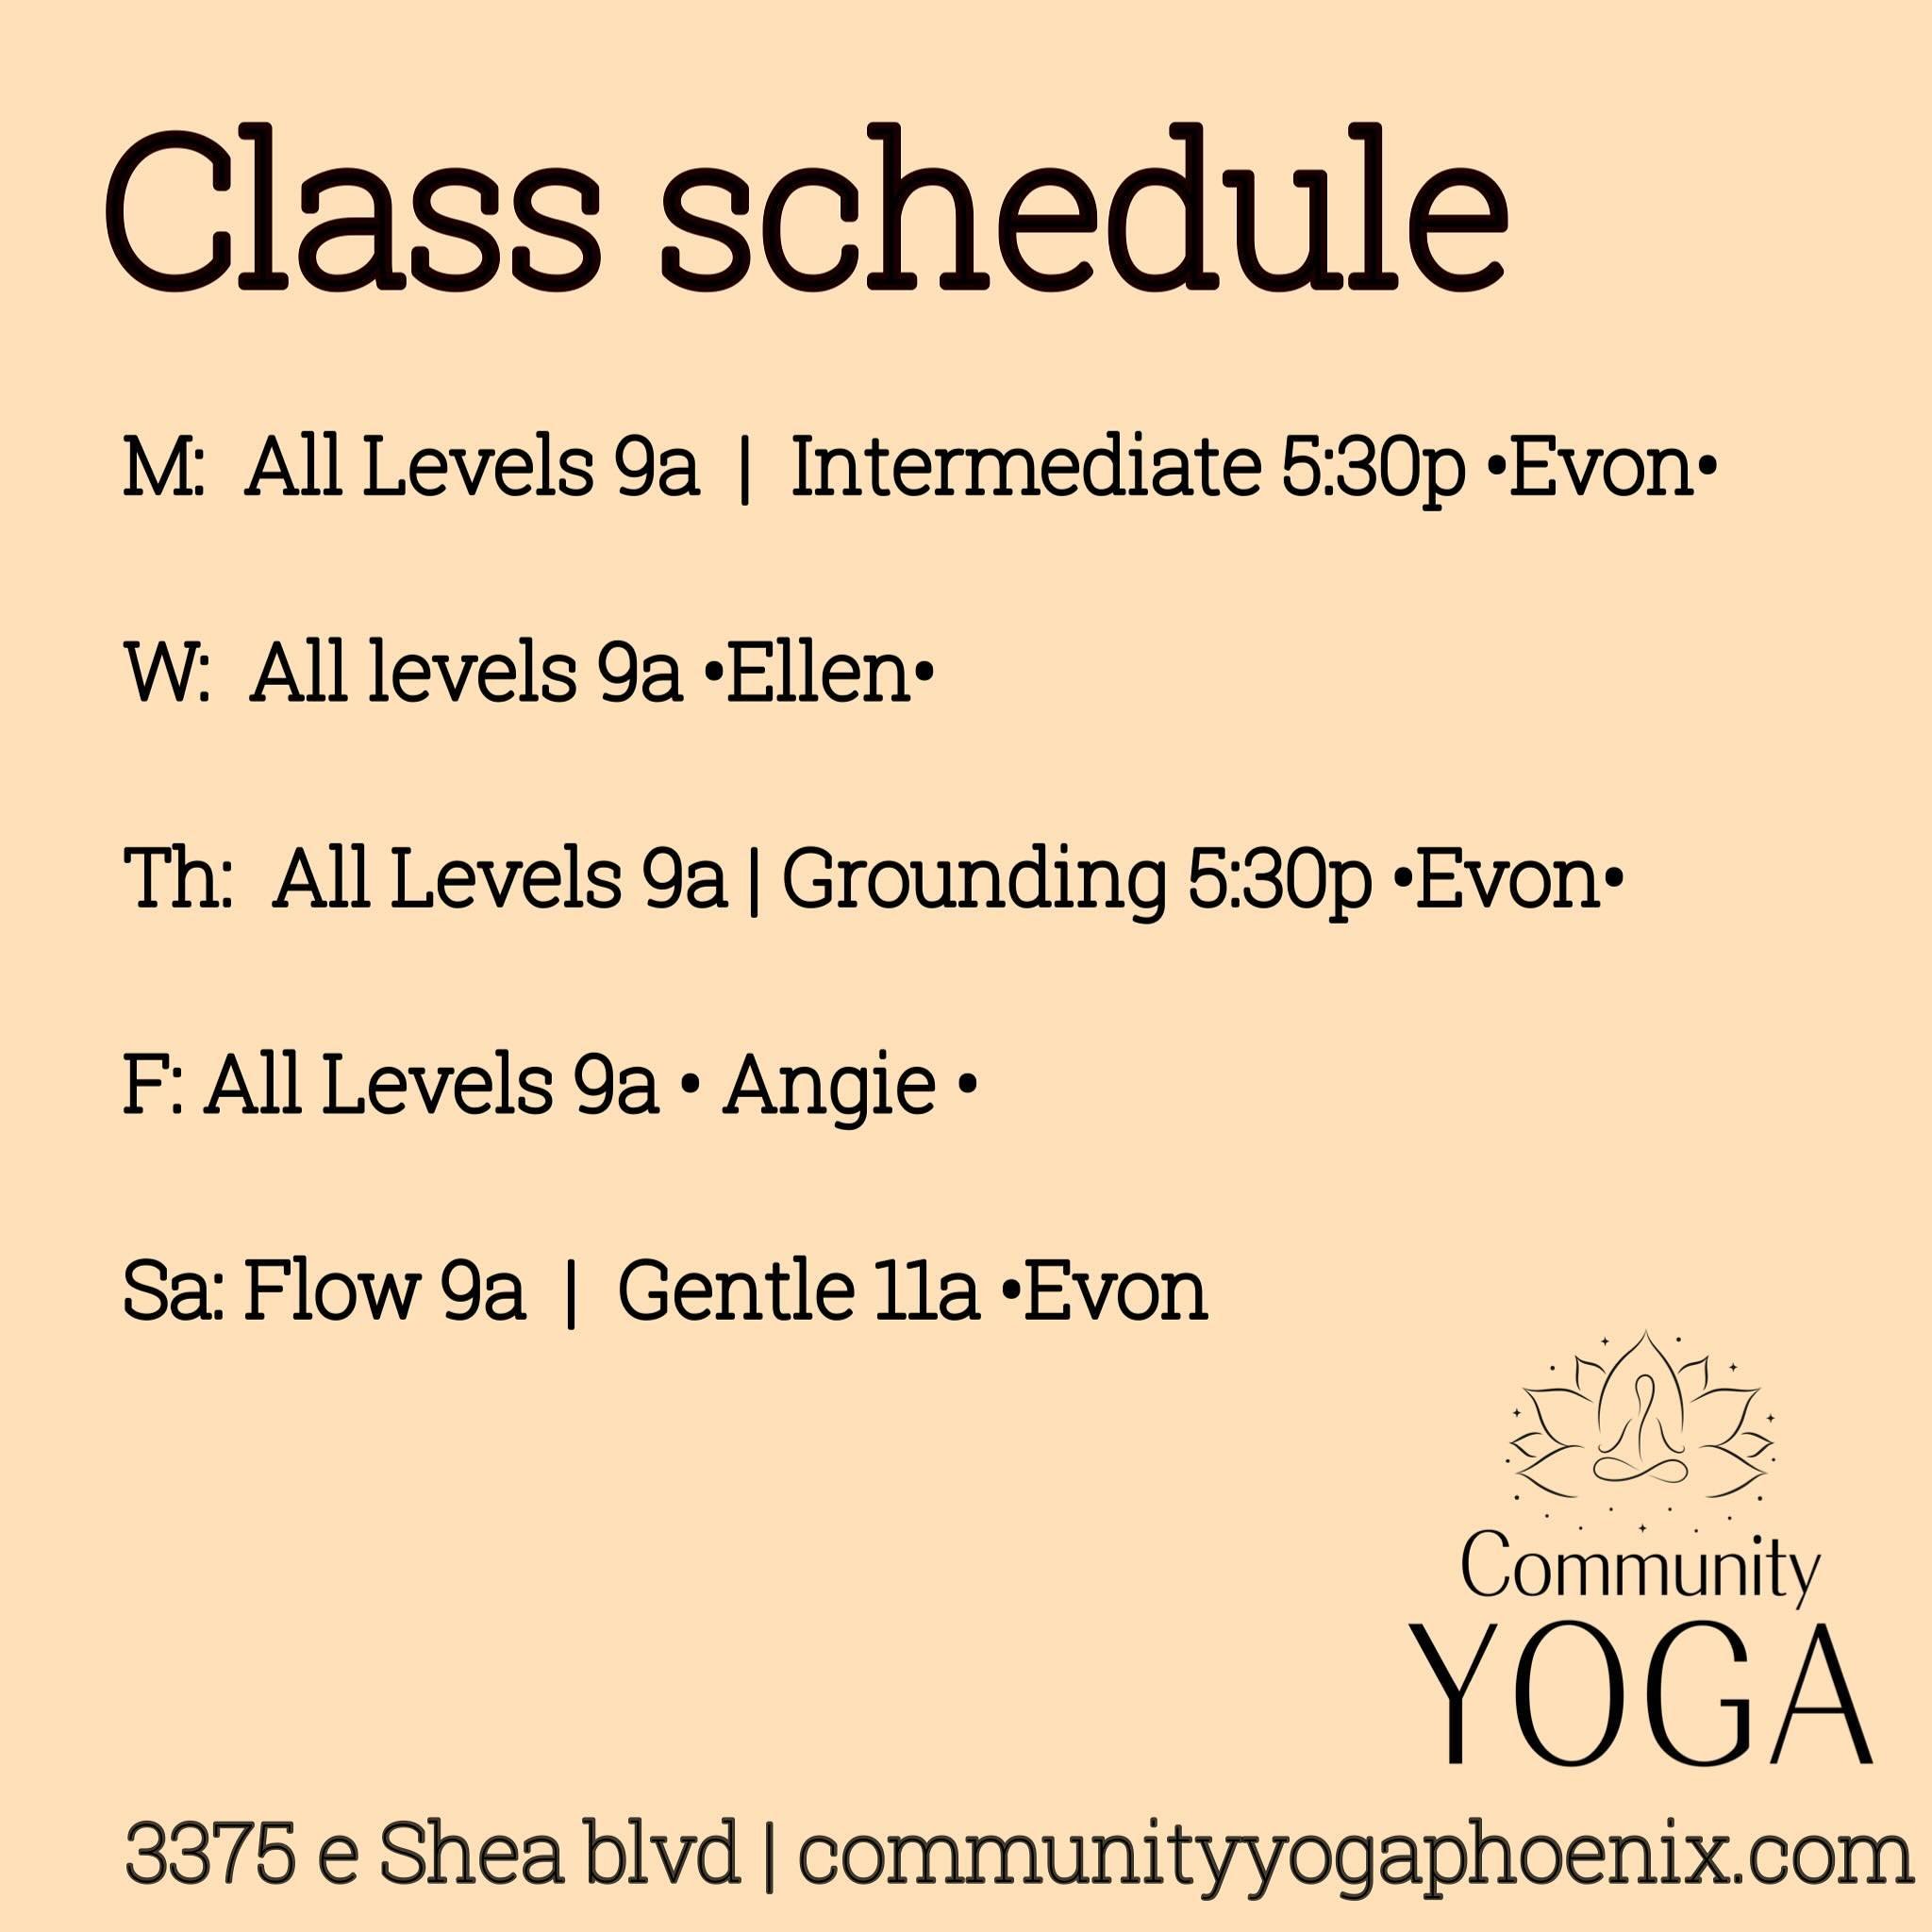 Community Yoga has been open for seven months and I am Evon, the founder. It&rsquo;s been such an incredible learning experience already, and I&rsquo;m loving getting to know the new (to me) area affectionately known as the Sheaborhood. 
.
We&rsquo;v